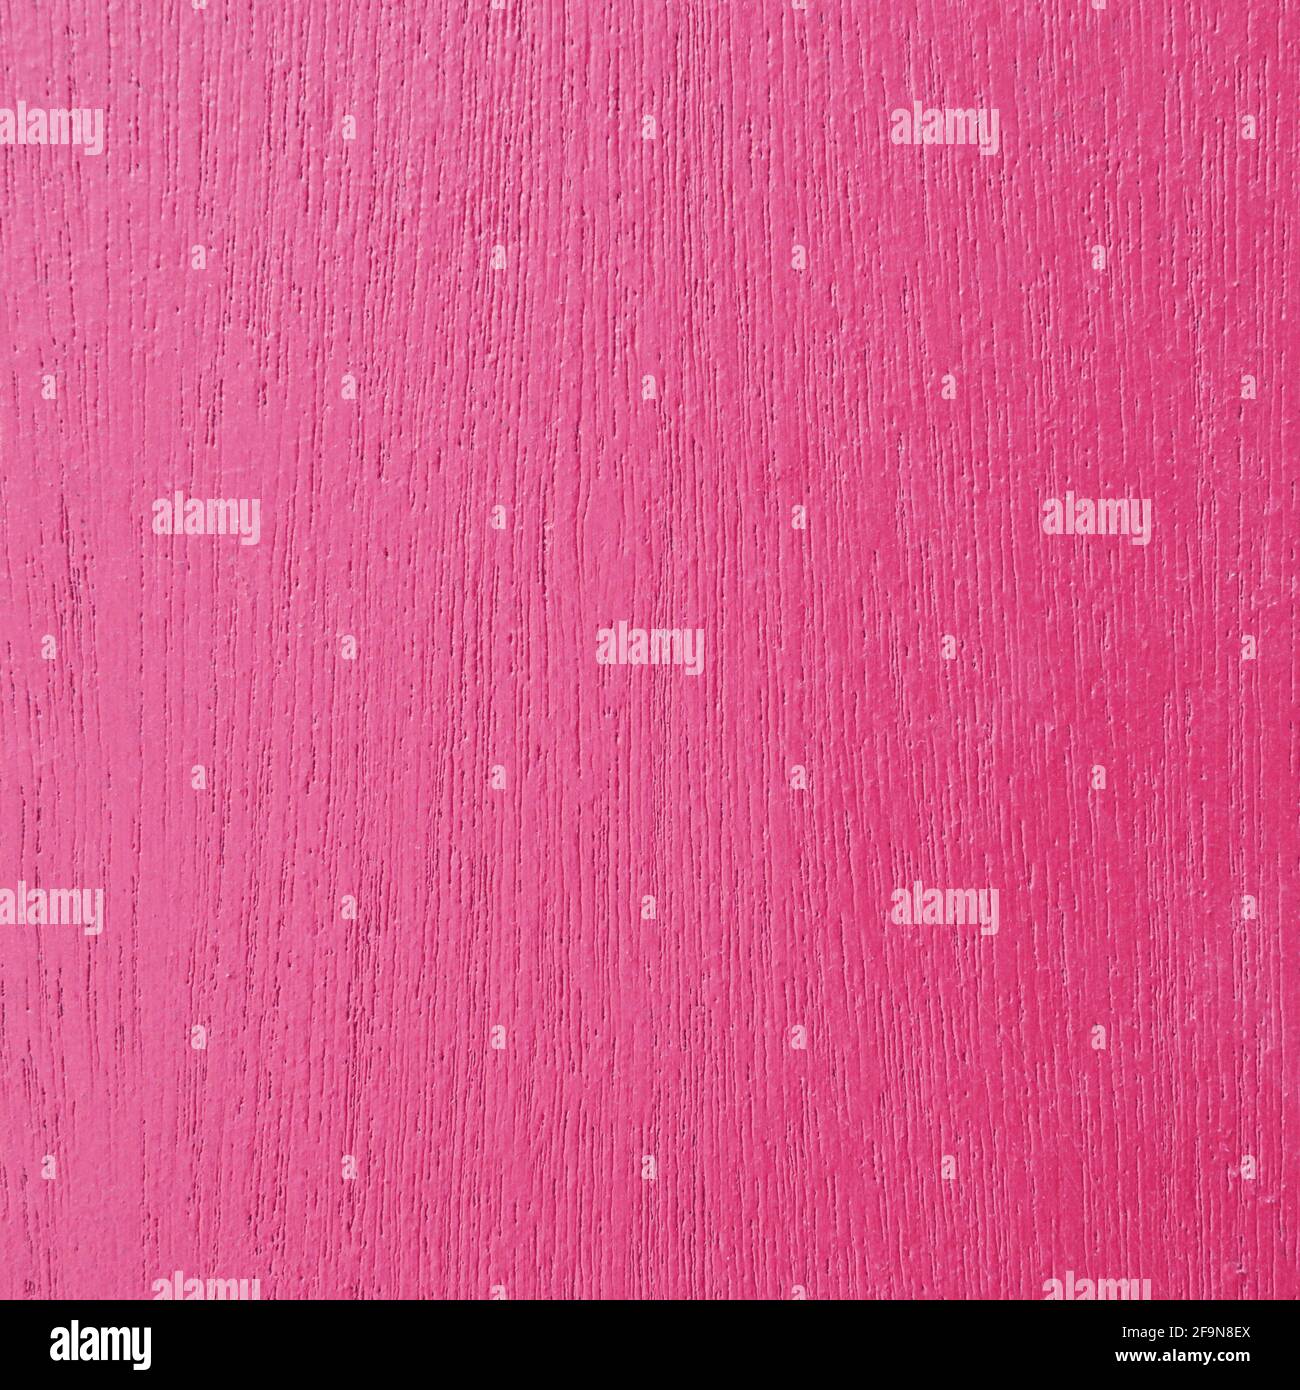 Colorful pink painted wood texure as background Stock Photo